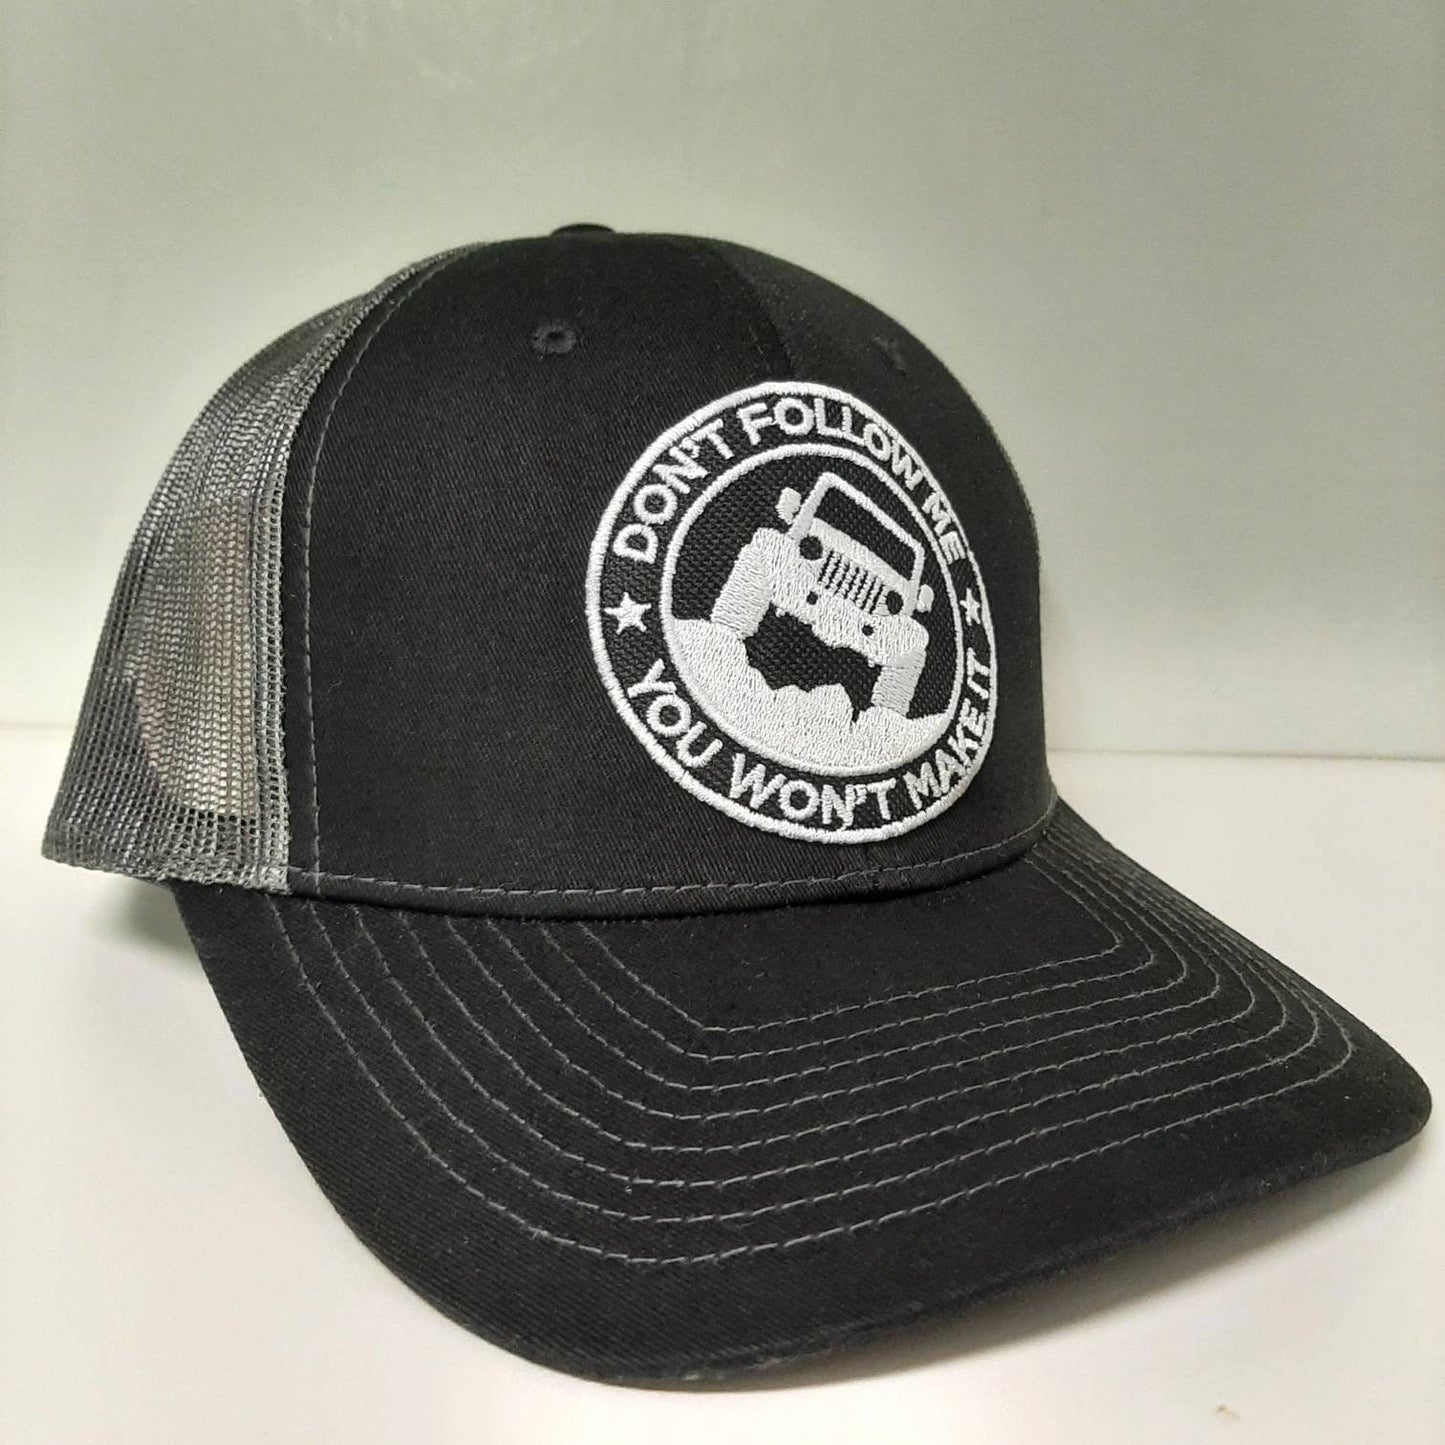 Jeep Lover Trucker Low Profile Baseball Cap Hat Mesh Snapback Black Embroidered Patch Wrangler